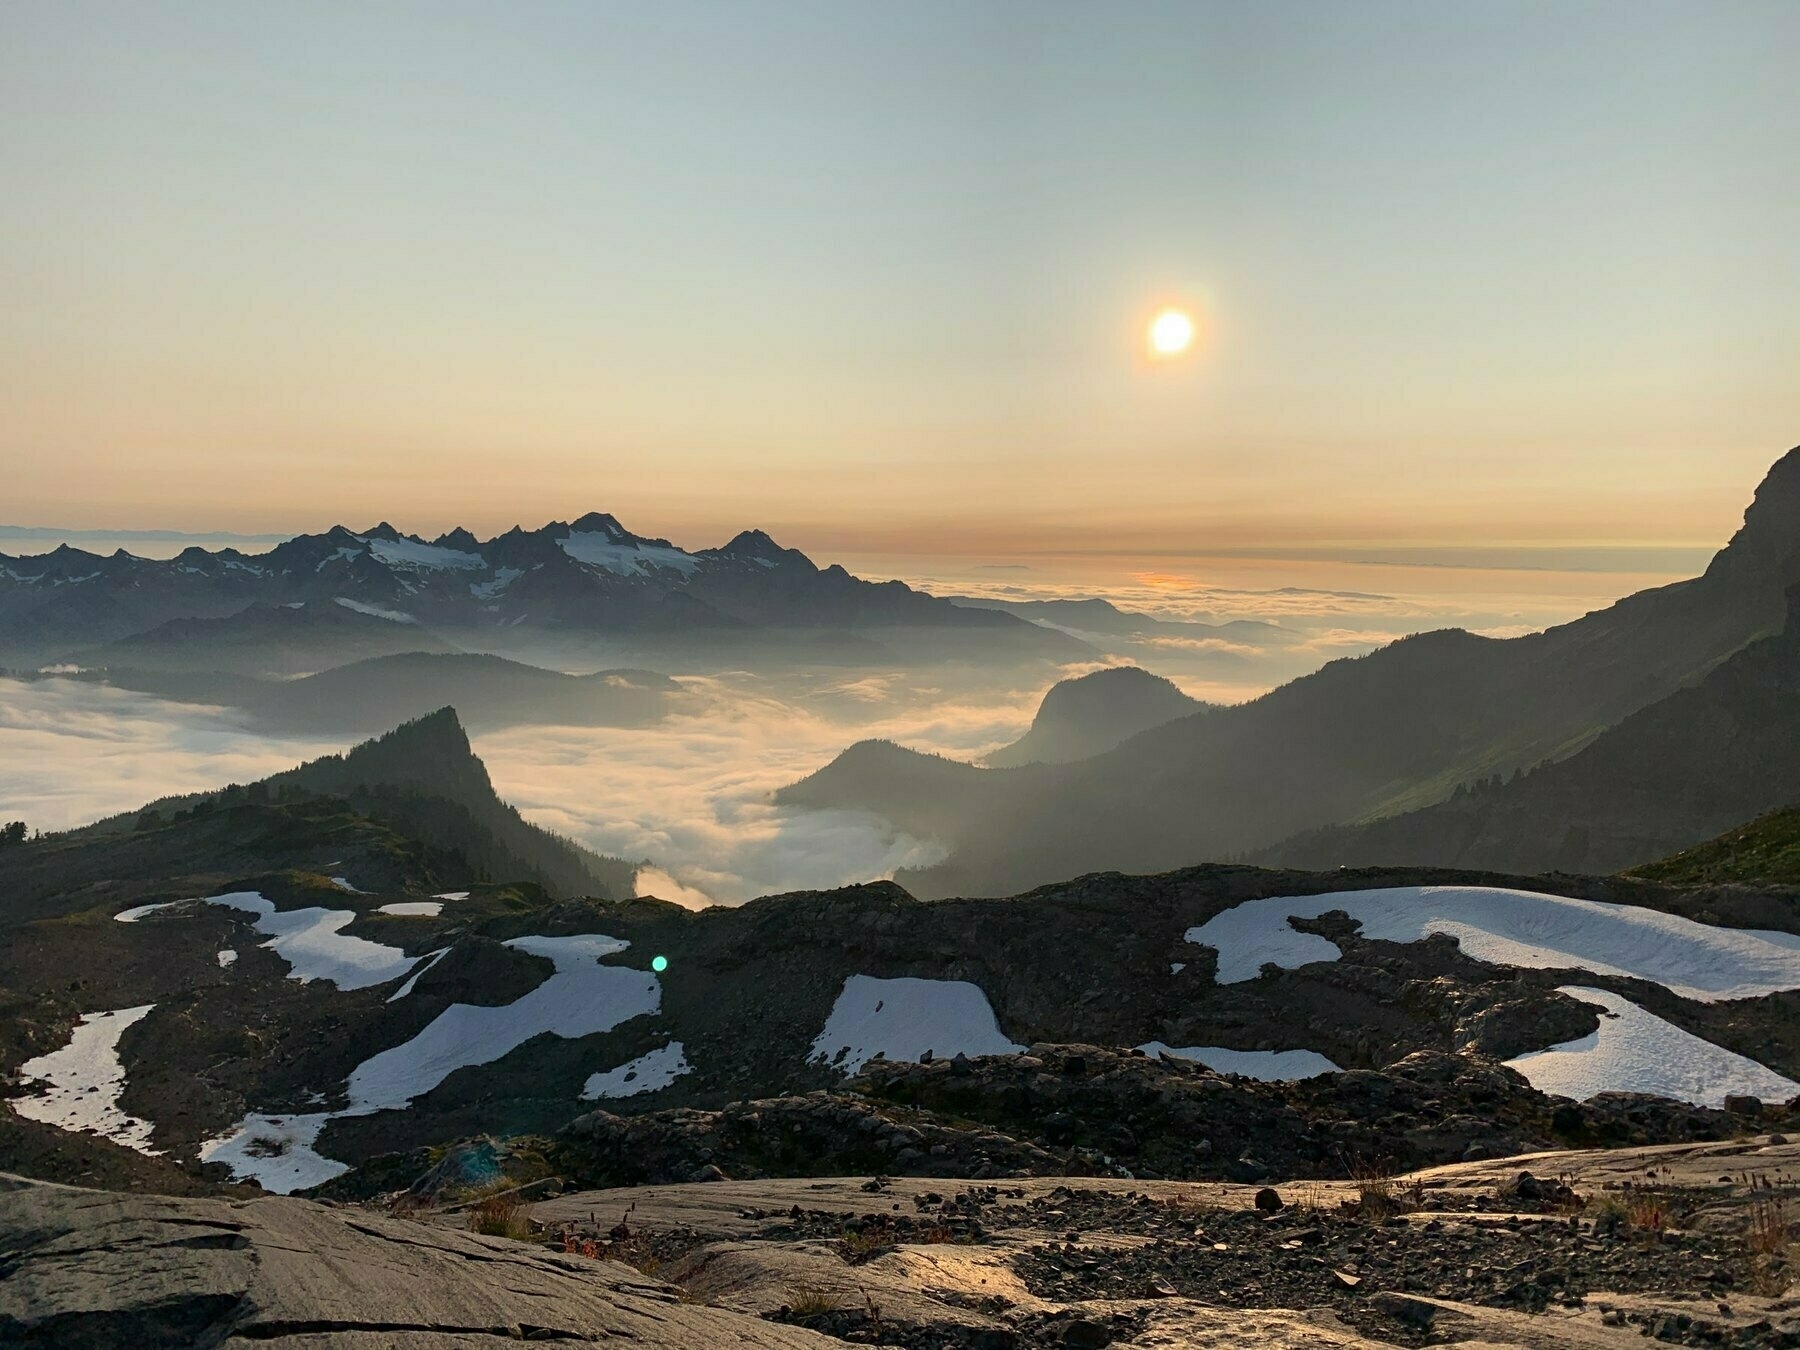 sunset view of mountains and mist at sunset from ½ way up Mt Baker in Washington, US